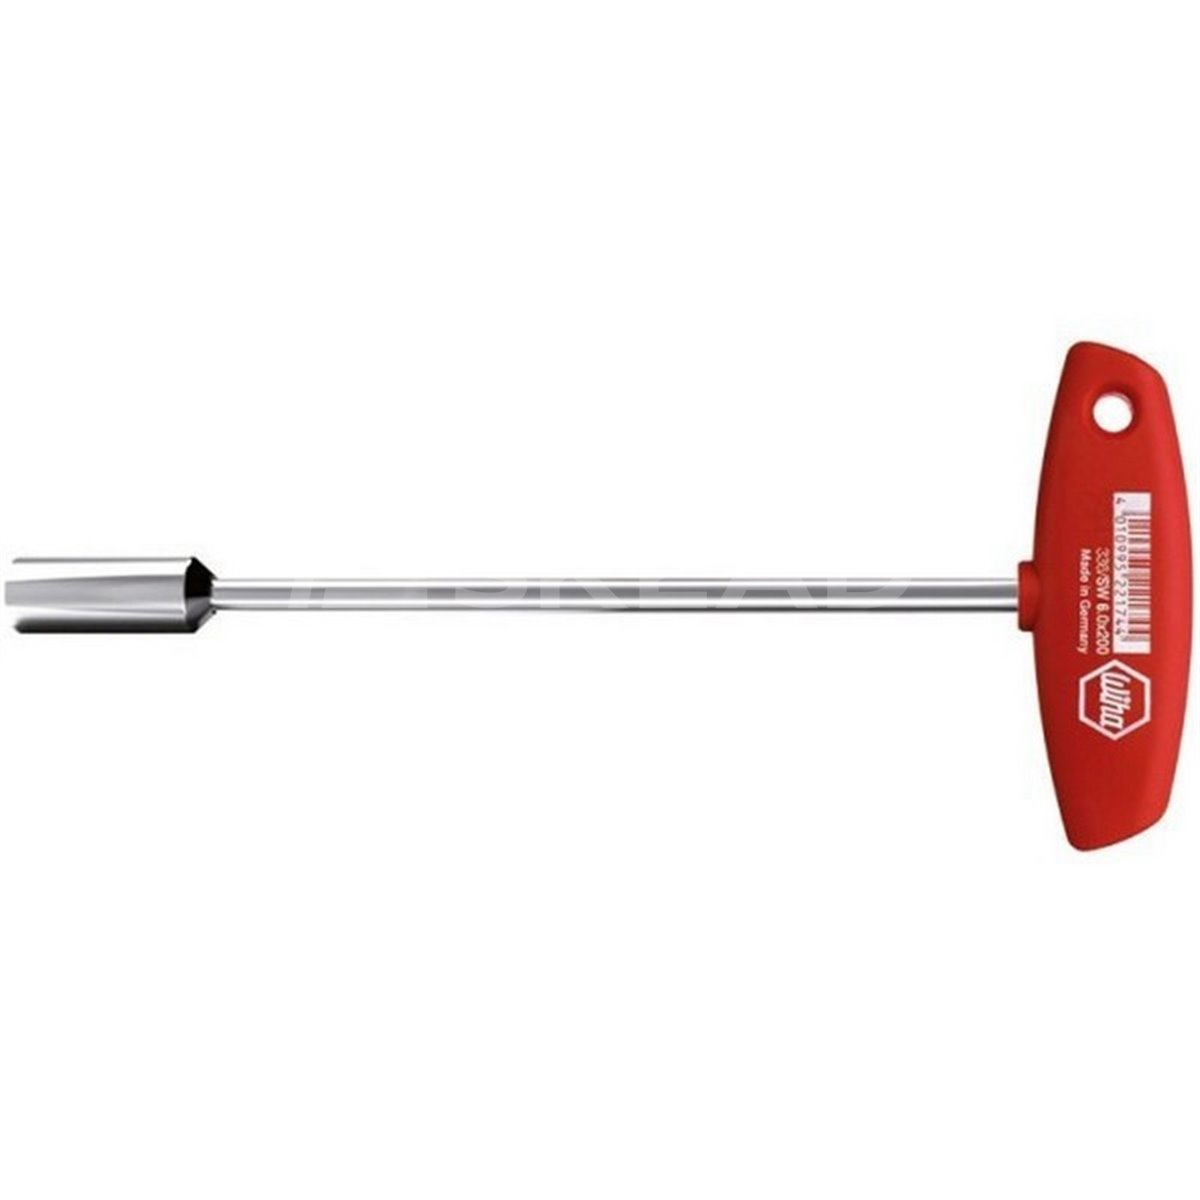 Socket wrench with T-handle. Classic 336 12 125mm Wiha 00985.